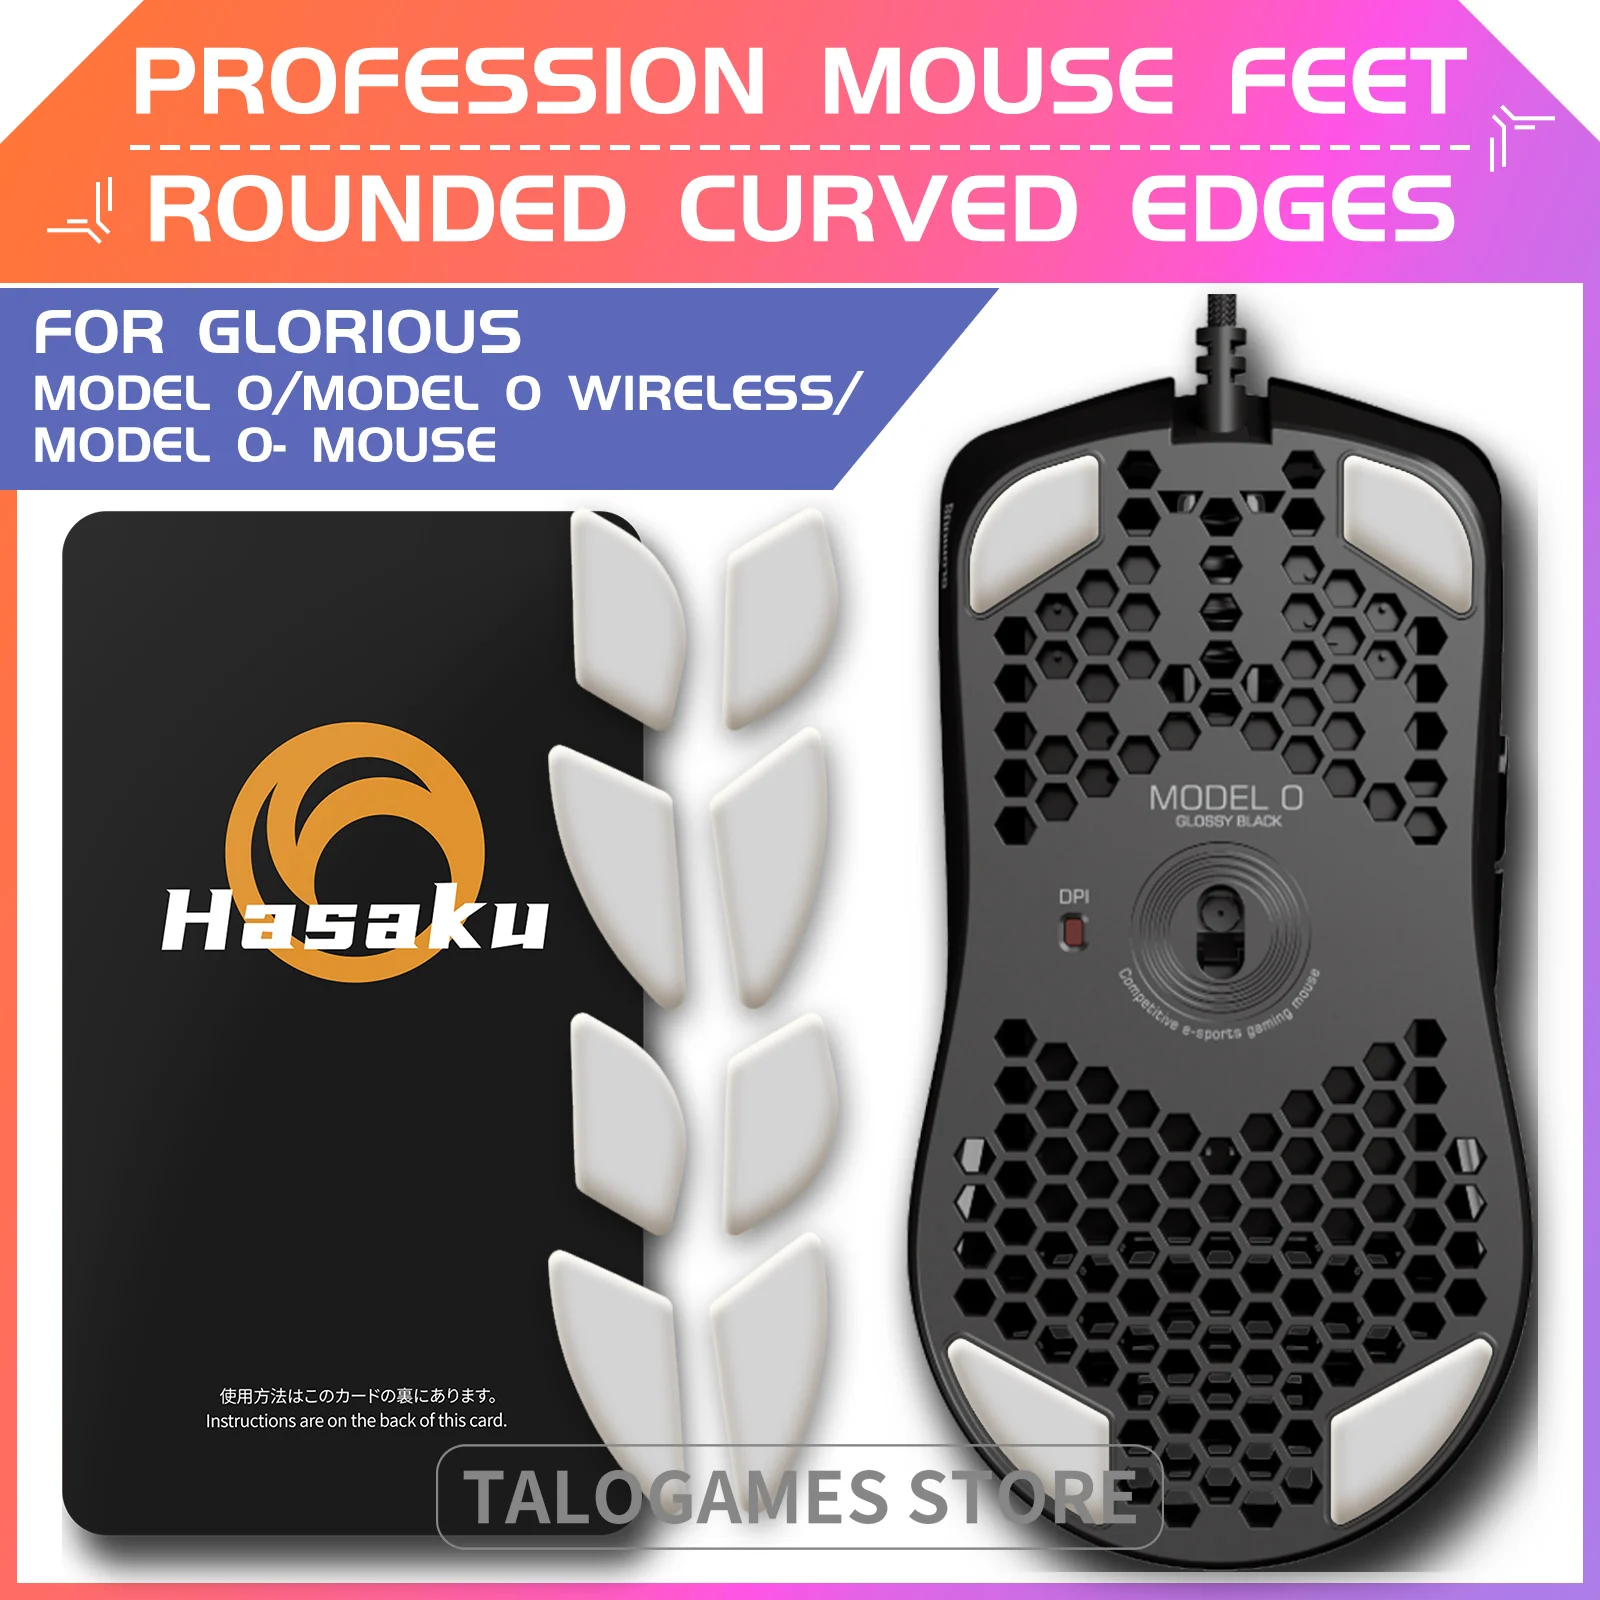 2 Sets HASAKU Rounded Curved Edges Gaming Mouse Feet Skates for Glorious Model O / O-(Minus) Mouse Feet Pad Replacement